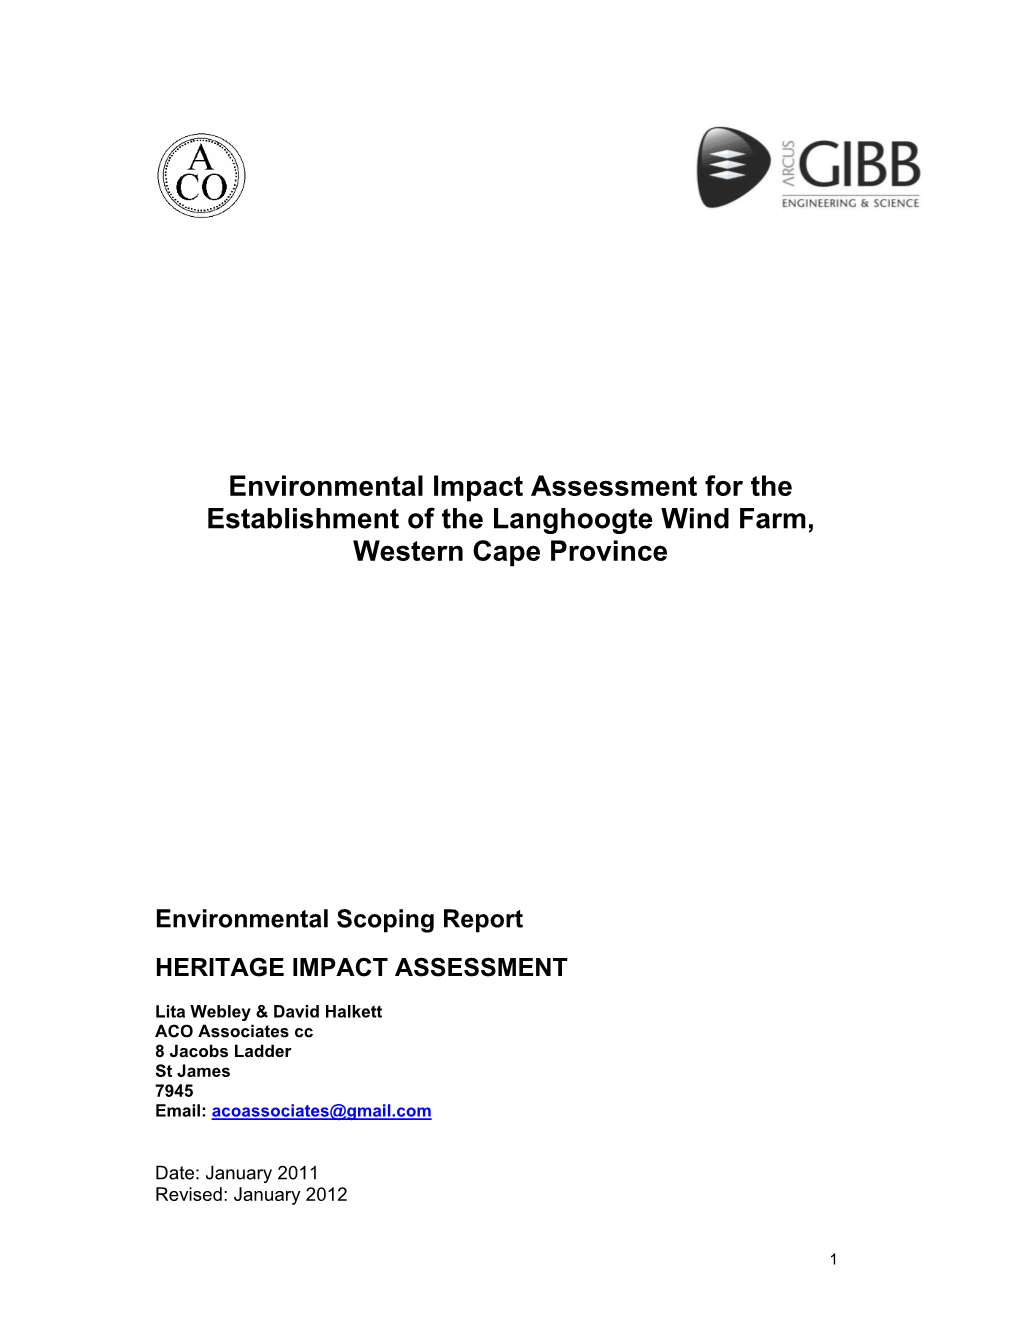 Environmental Impact Assessment for the Establishment of the Langhoogte Wind Farm, Western Cape Province